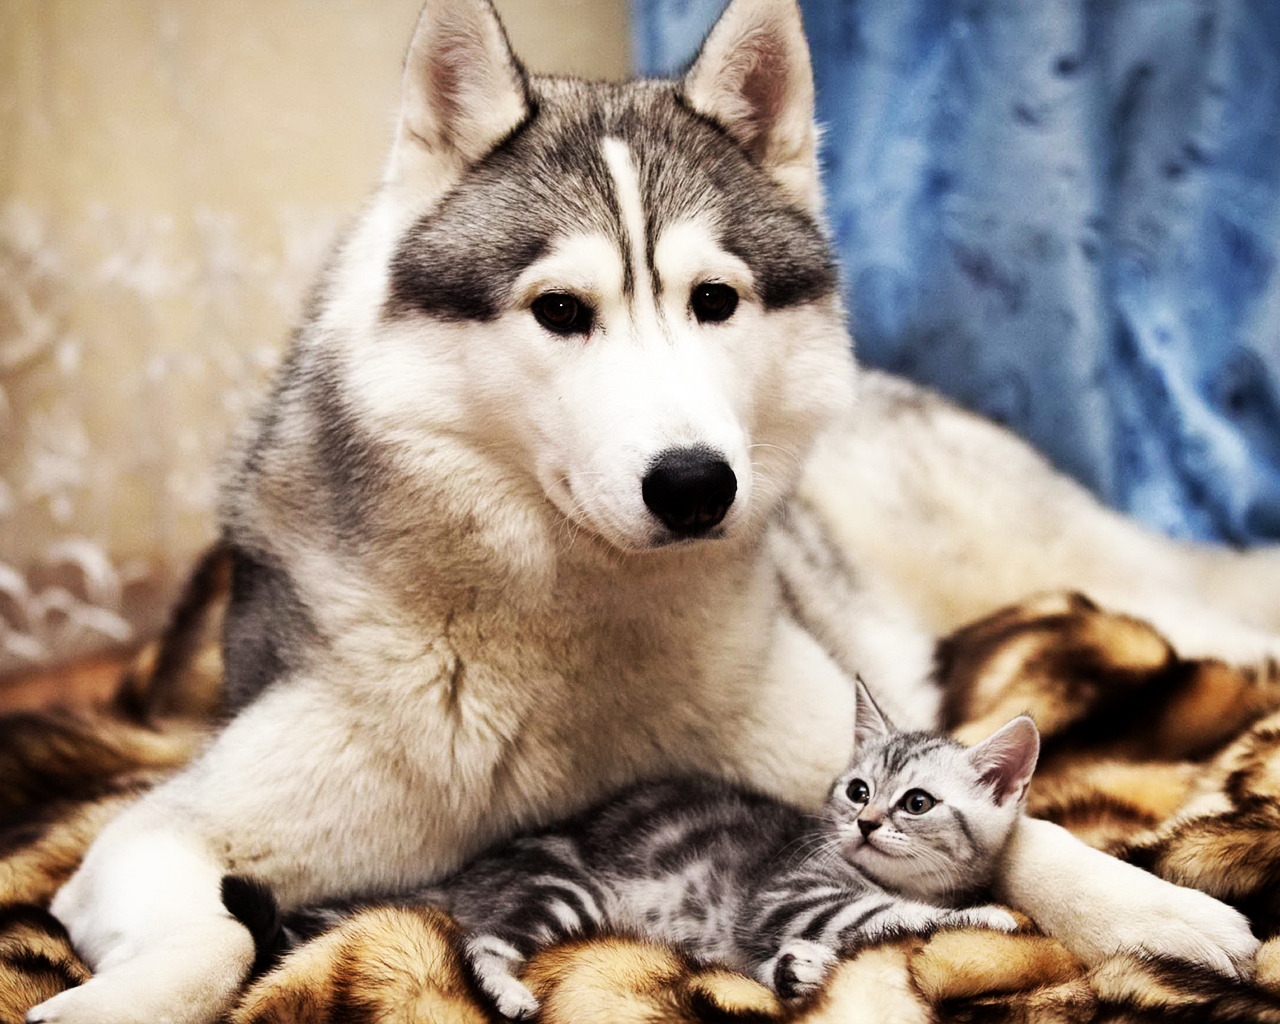 Dog and Cat Friends for 1280 x 1024 resolution